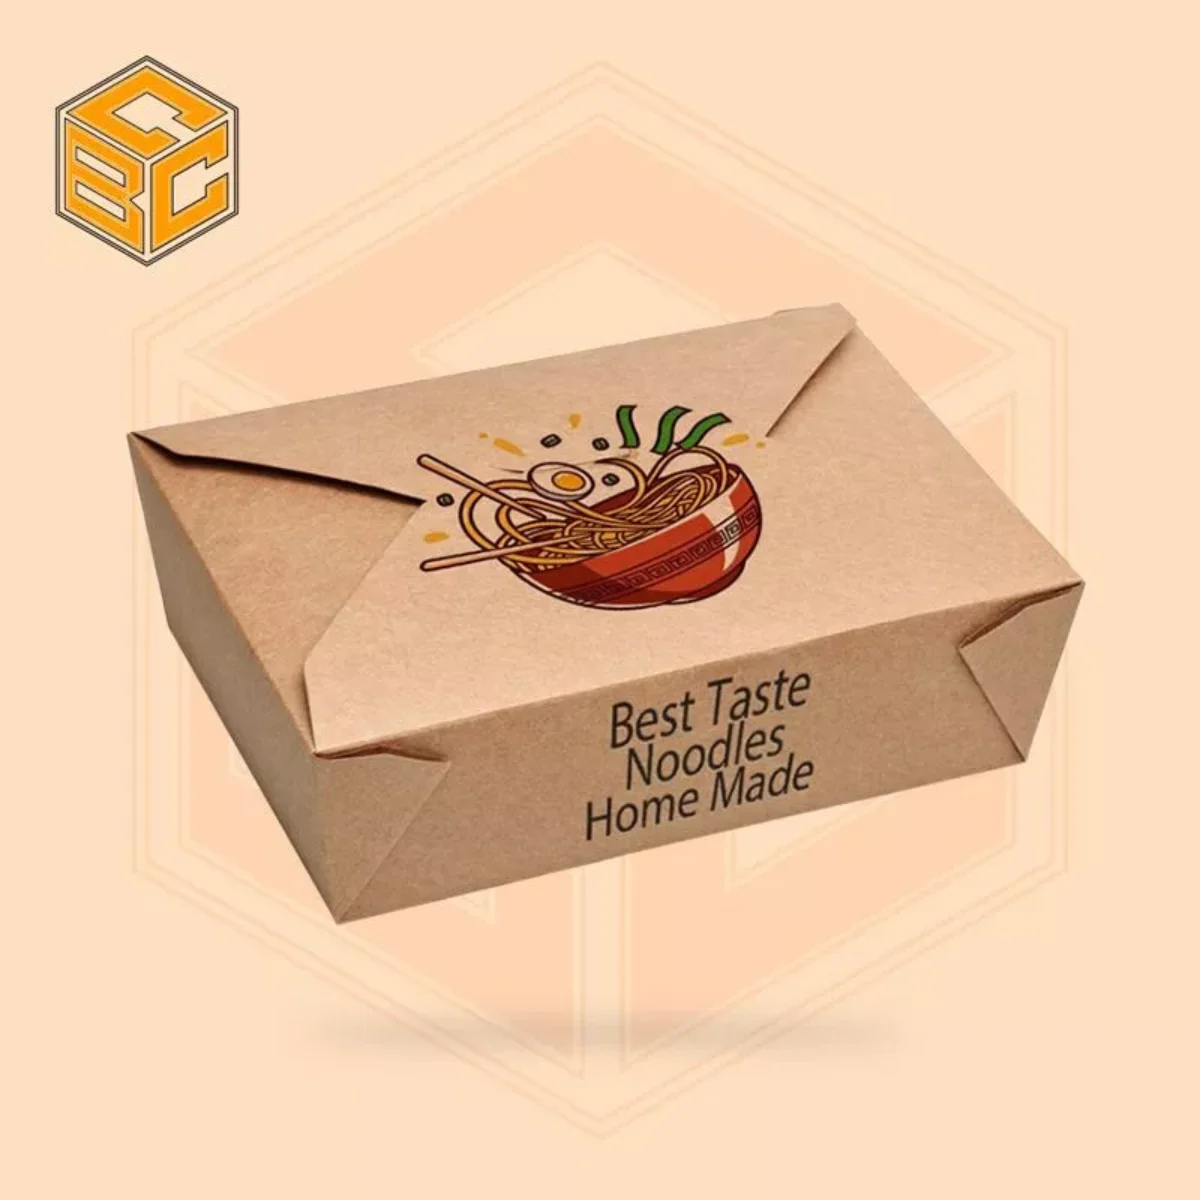 Customize Cake Boxes & Print Food Packaging Boxes